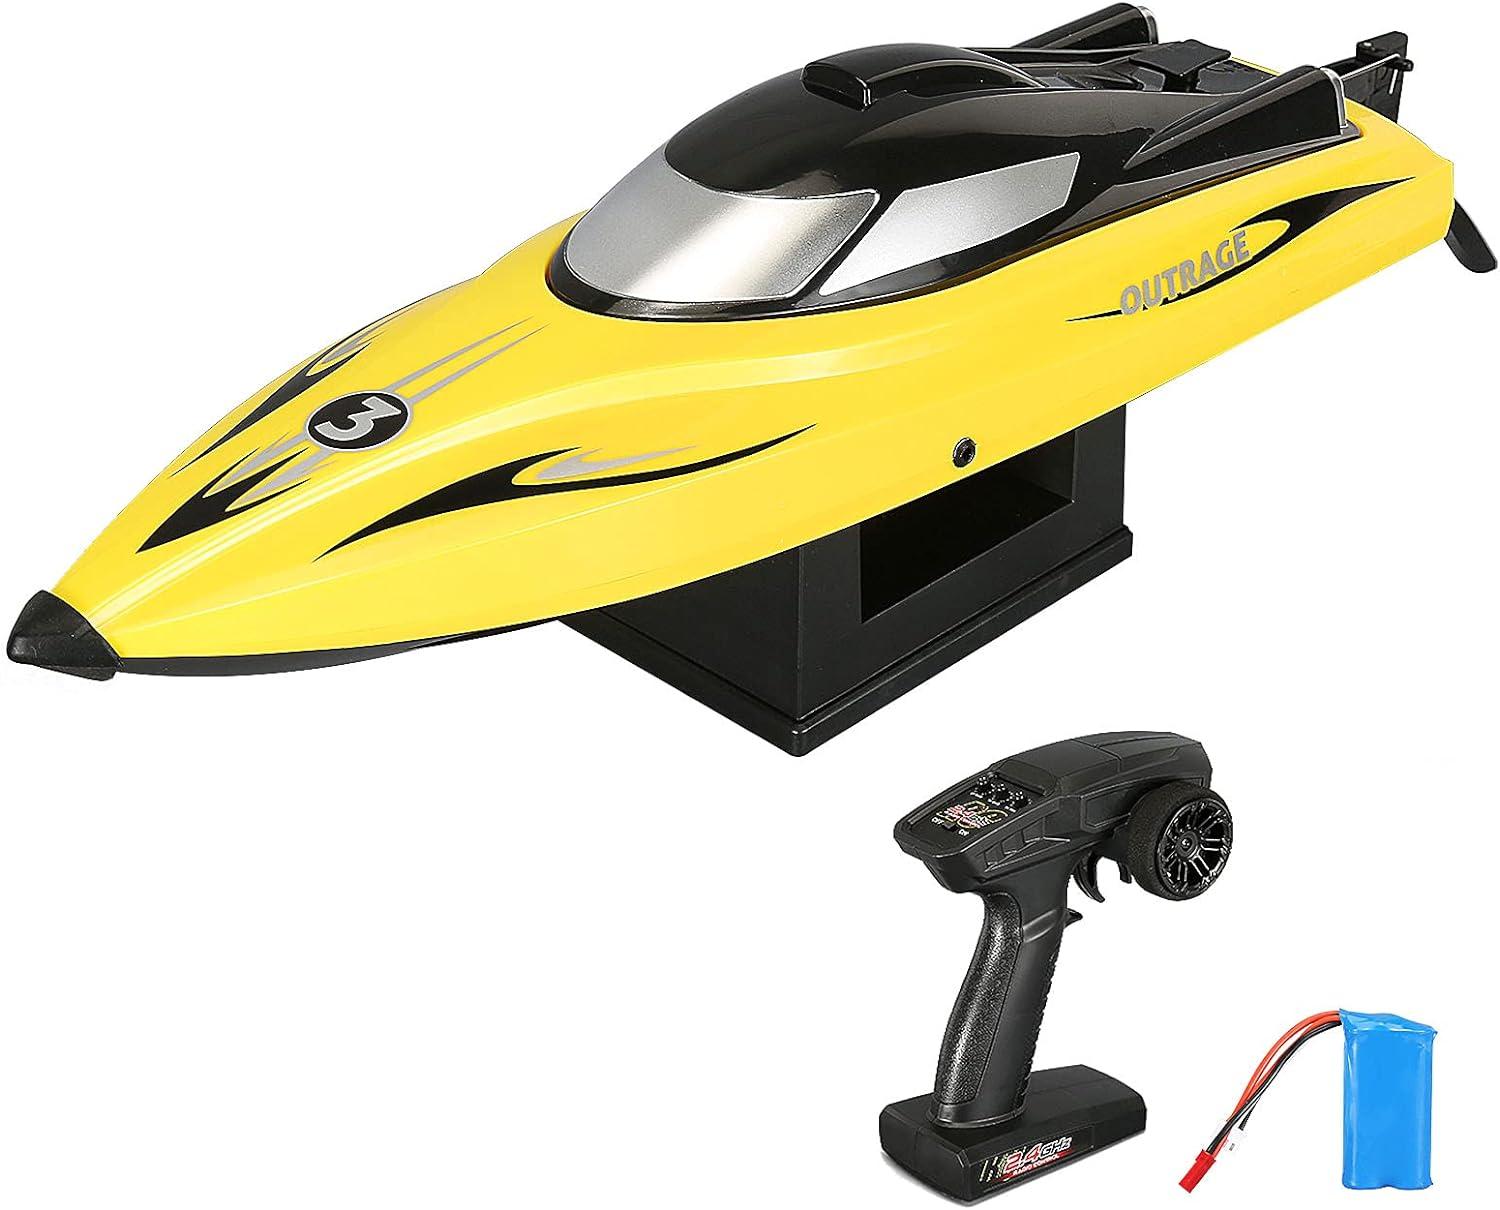 Yellow Rc Boat: Benefits and Features of Yellow RC Boats